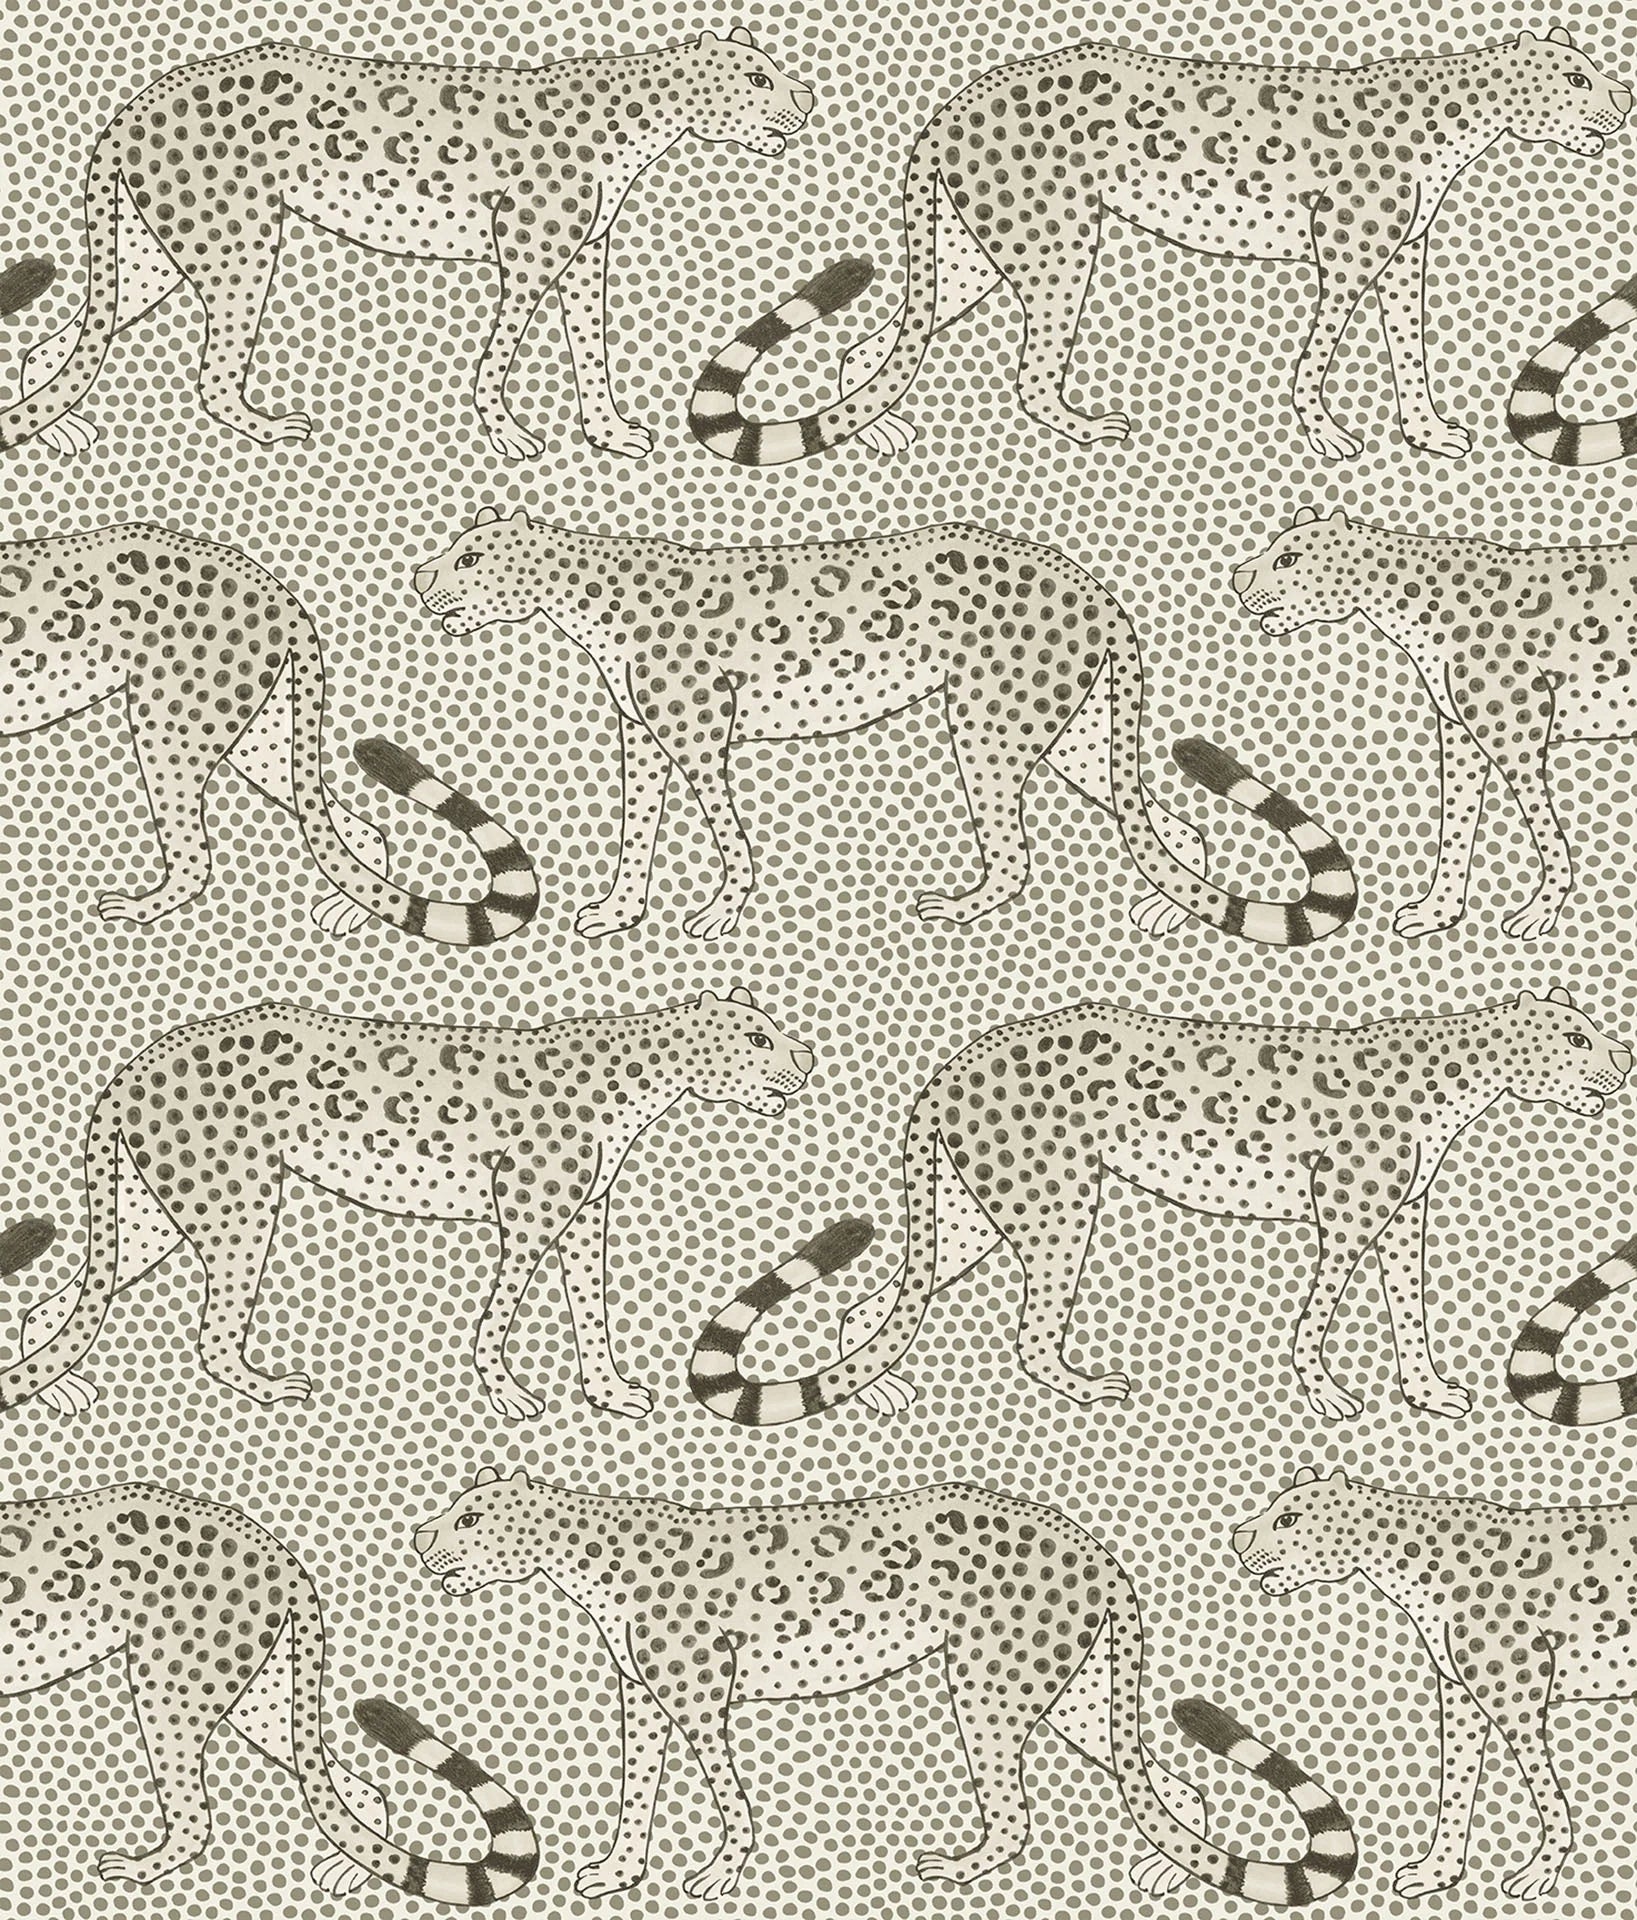 Tapeta THE ARDMORE COLLECTION - Leopard Walk szaro-beżowy Cole & Son    Eye on Design